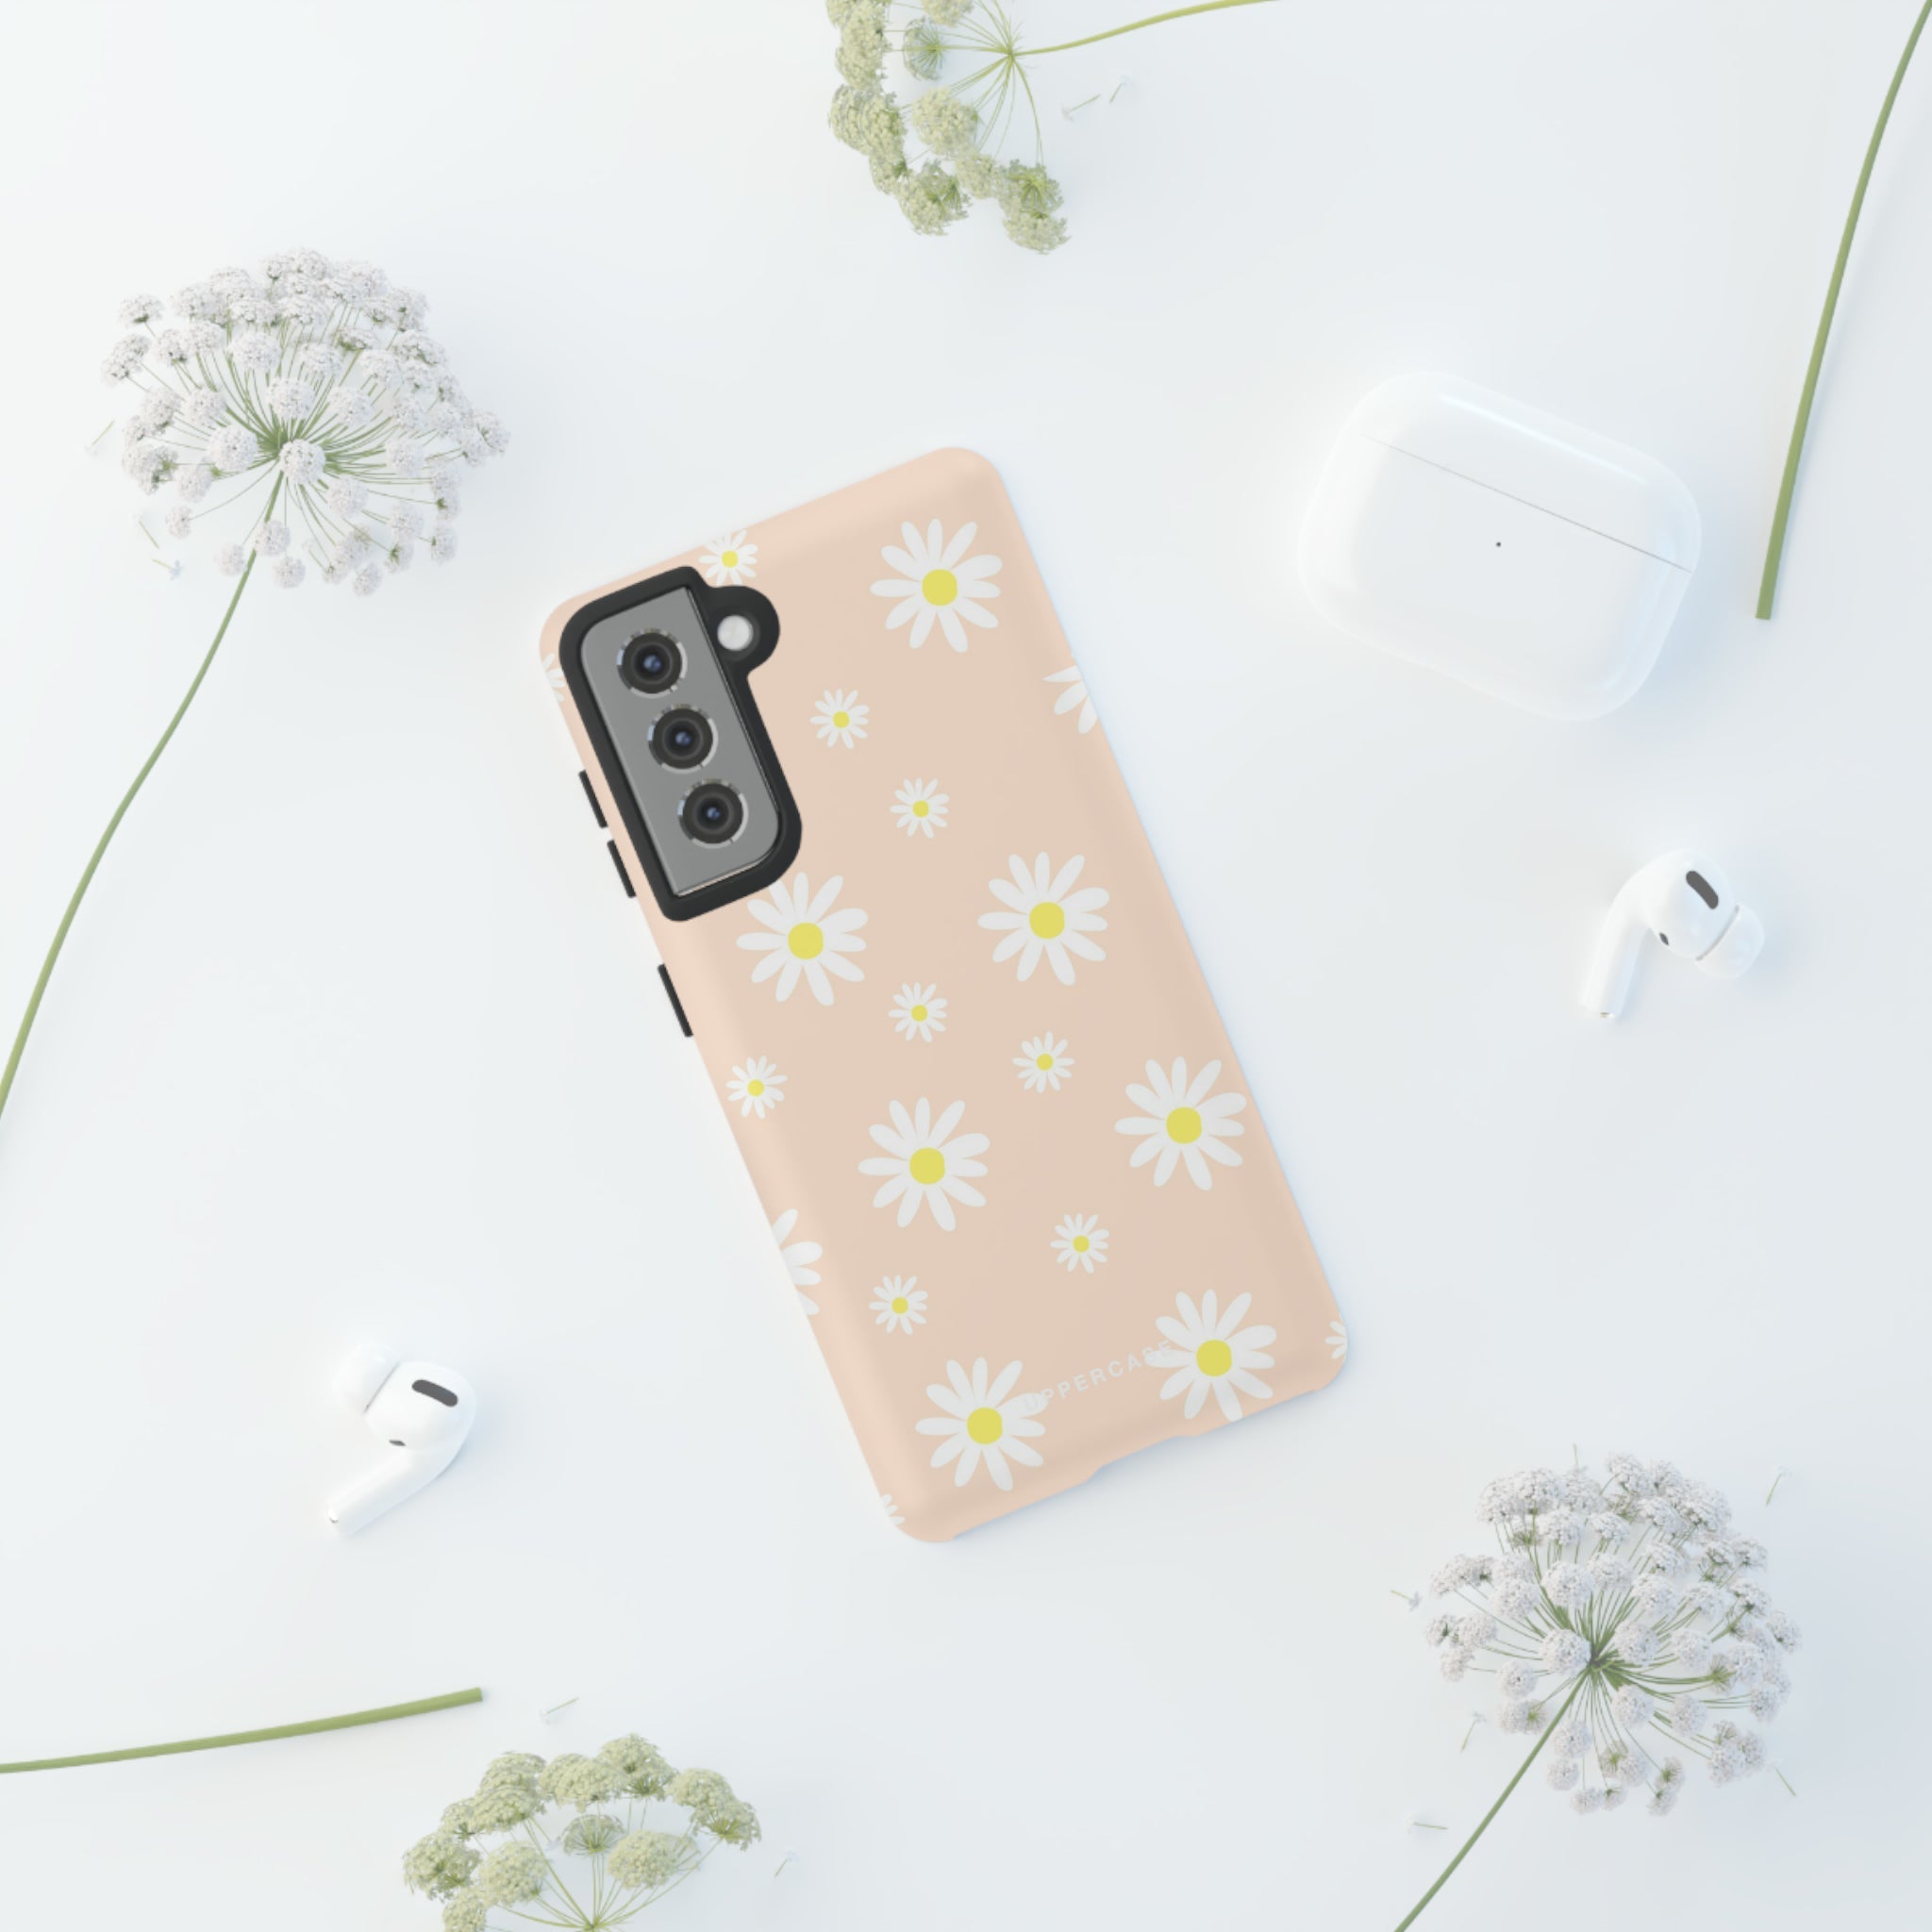 Blossomy Daisy - Personalised Strong Case